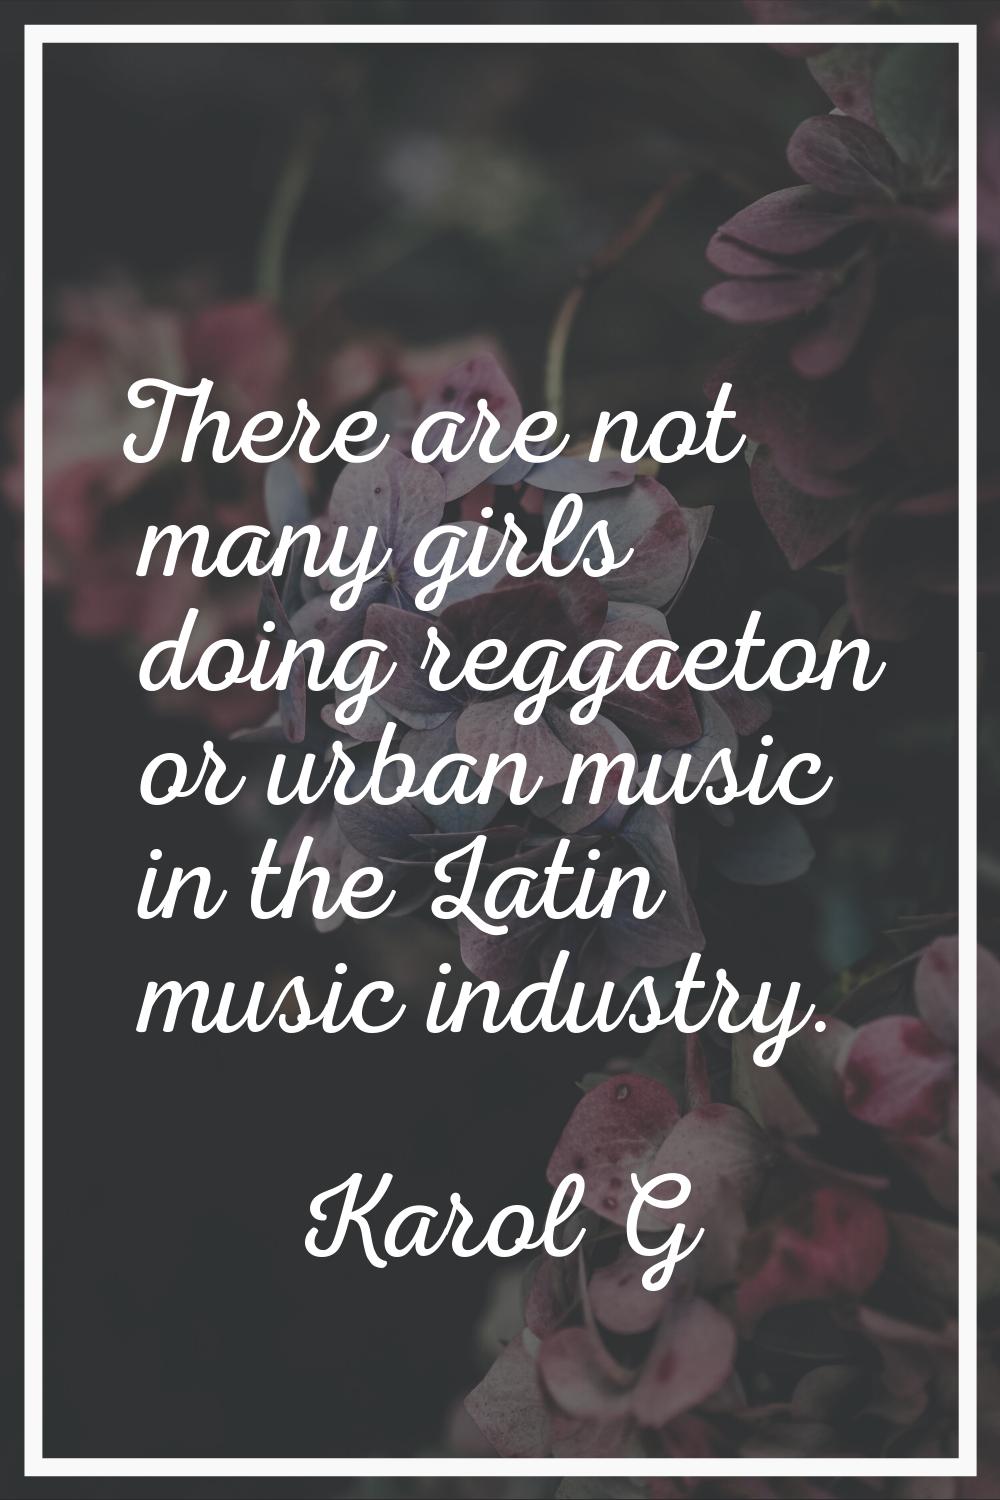 There are not many girls doing reggaeton or urban music in the Latin music industry.